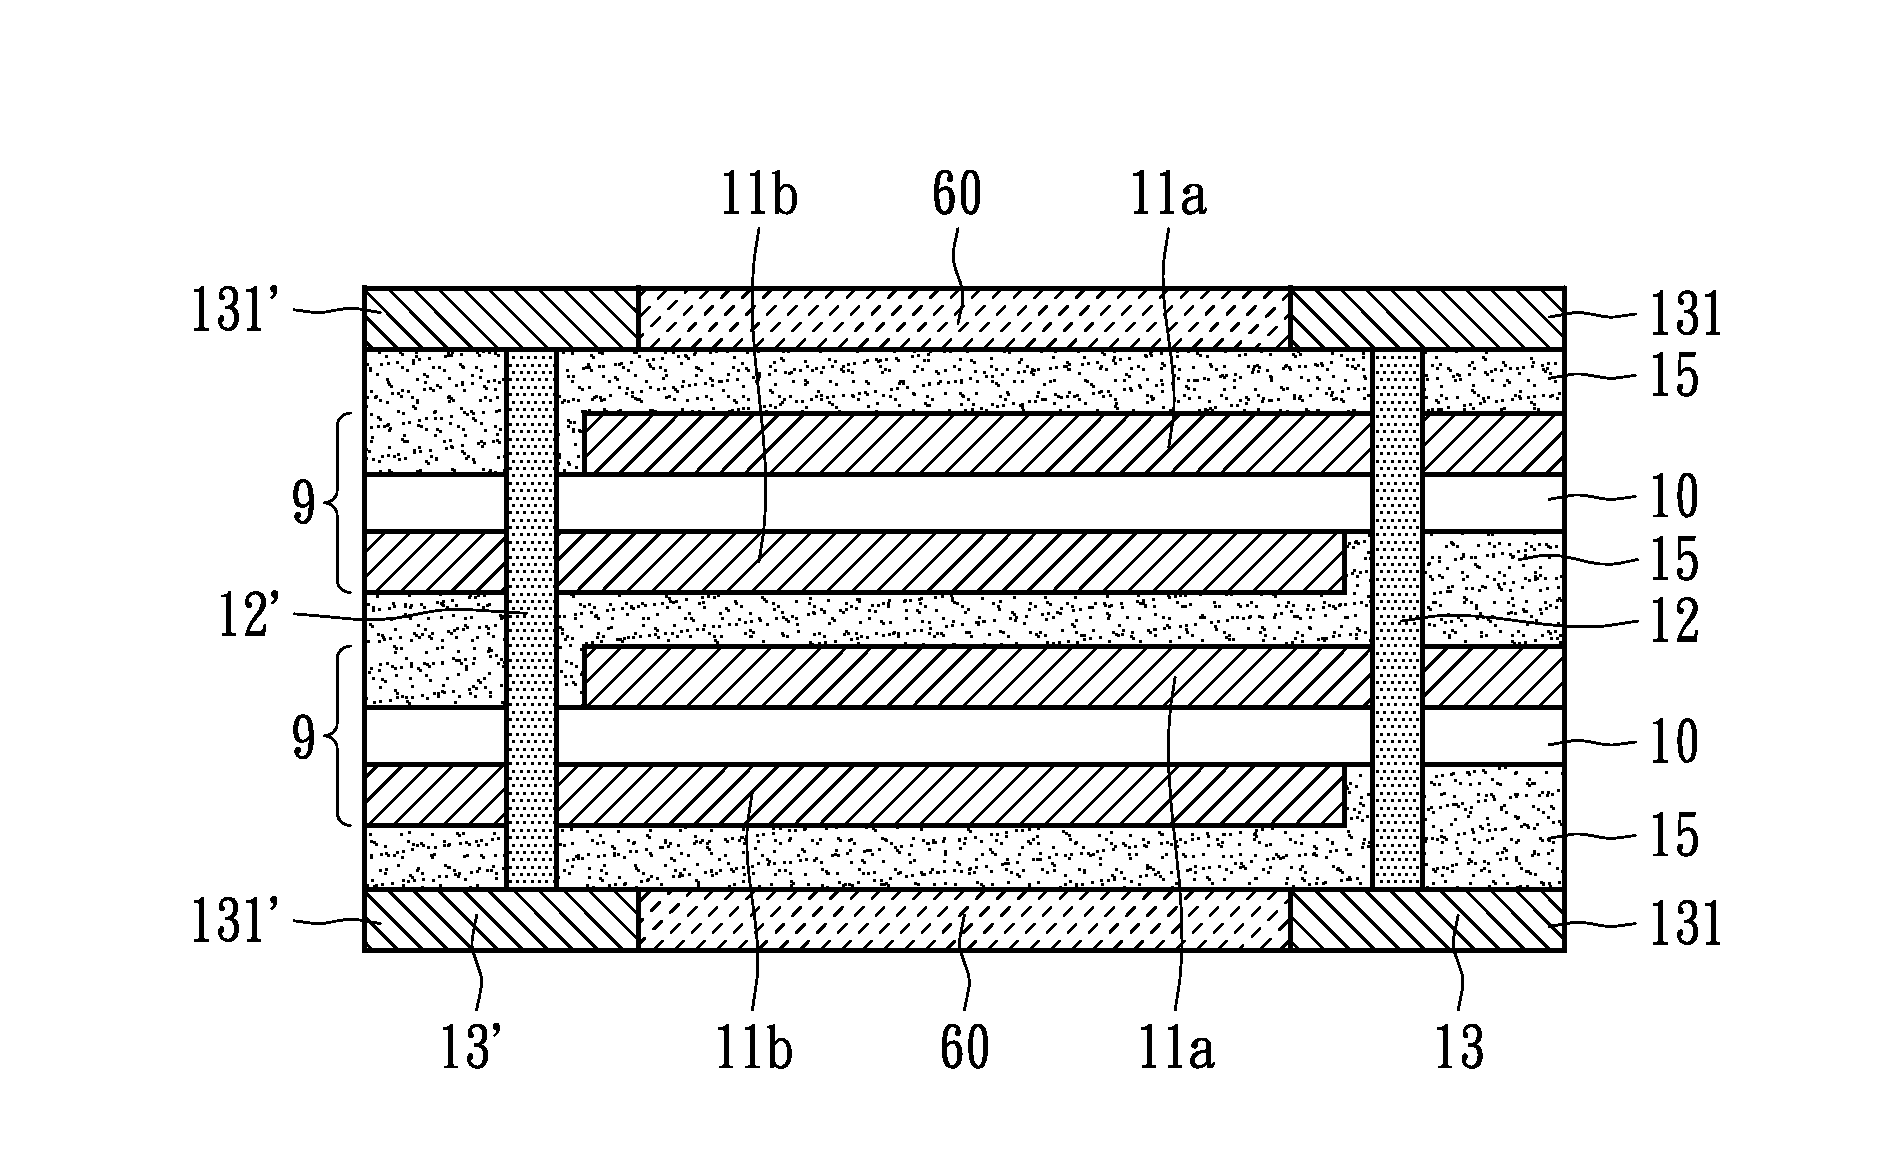 Surface mountable over-current protection device